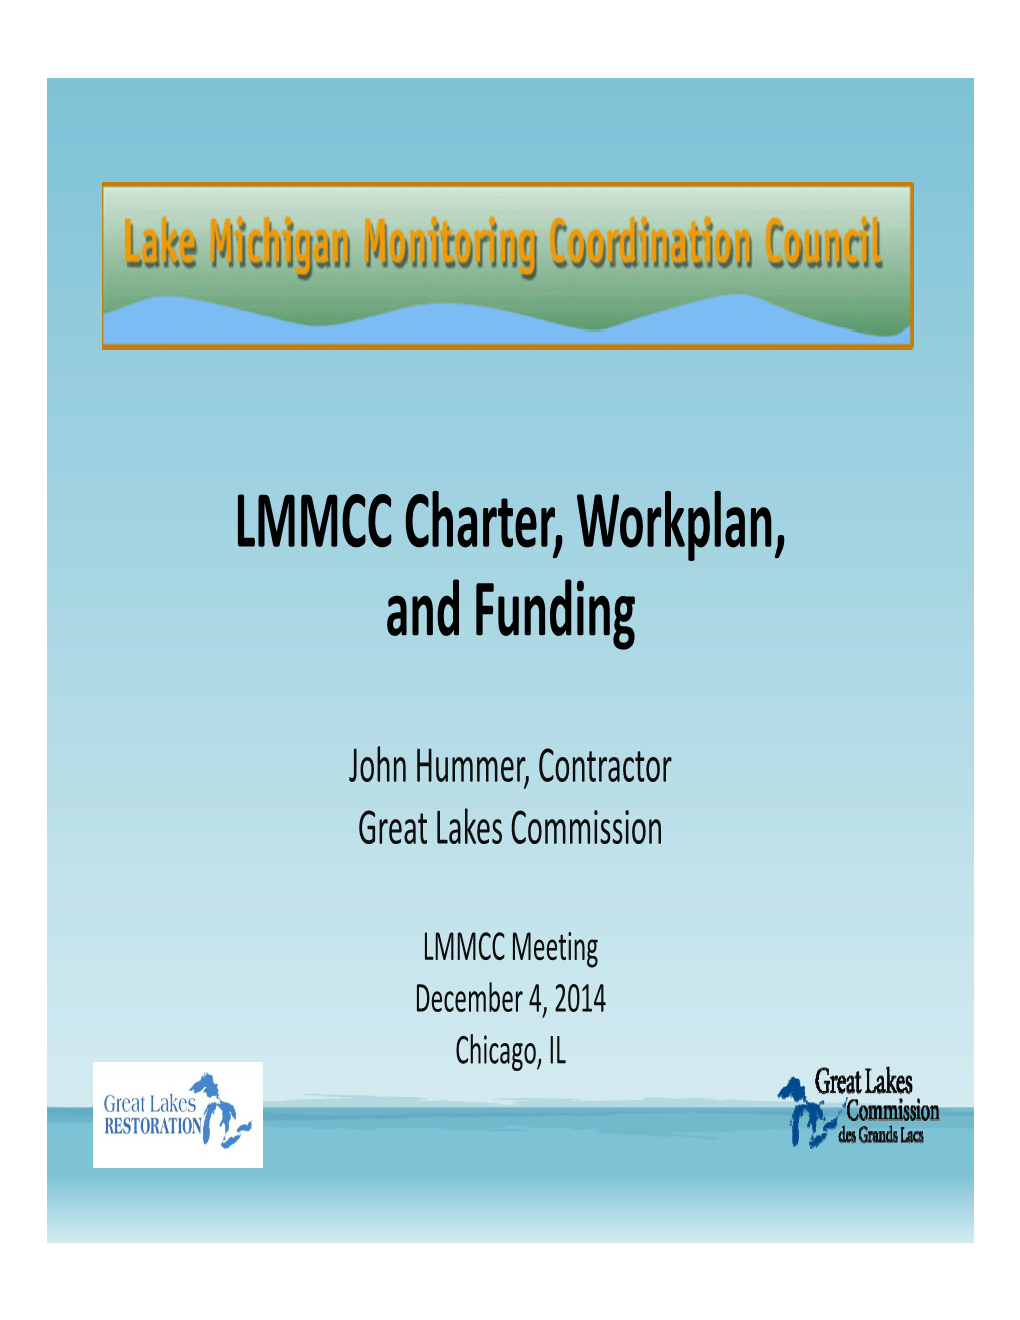 LMMCC Charter, Workplan, and Funding